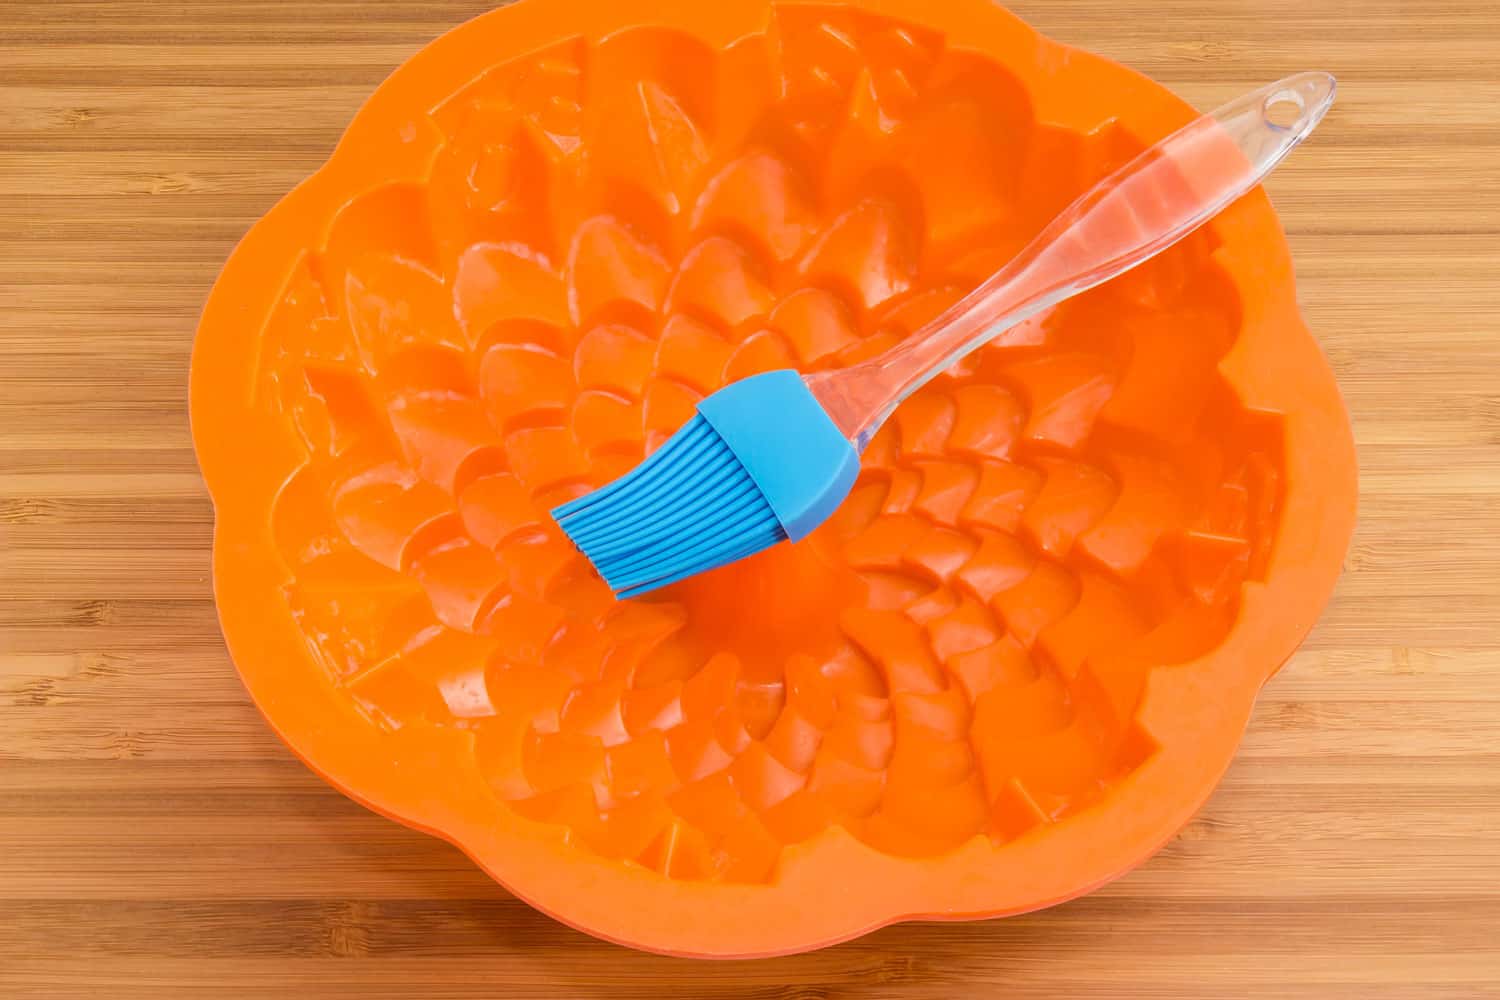 Modern silicone pastry brush in empty silicone cake pan in bundt-style on a wooden bamboo cutting board